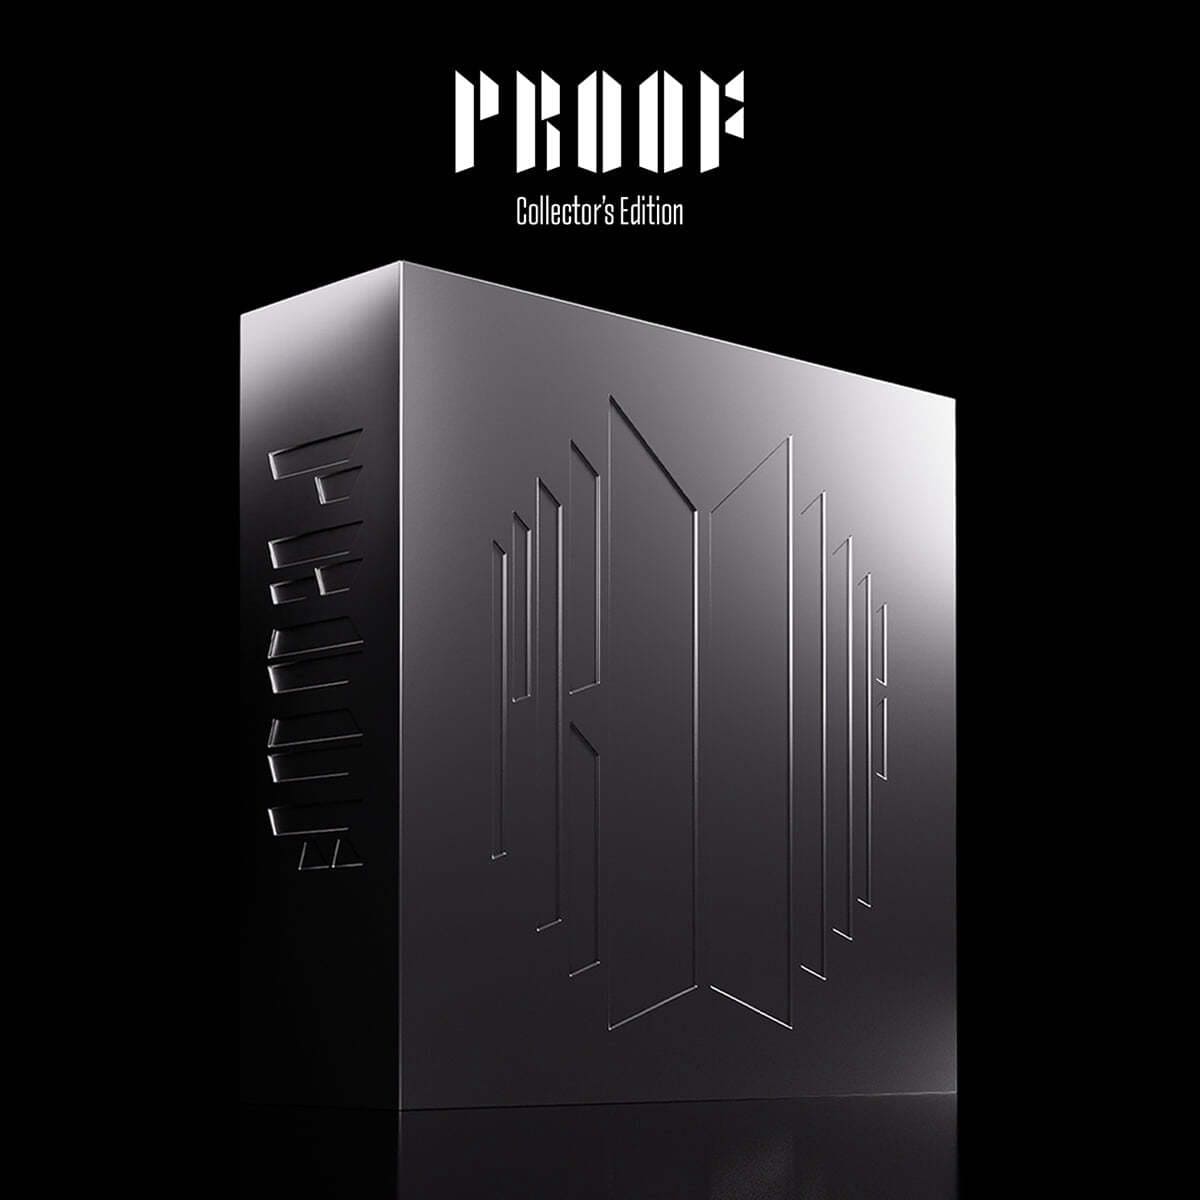 BTS - Proof Collector’s Edition